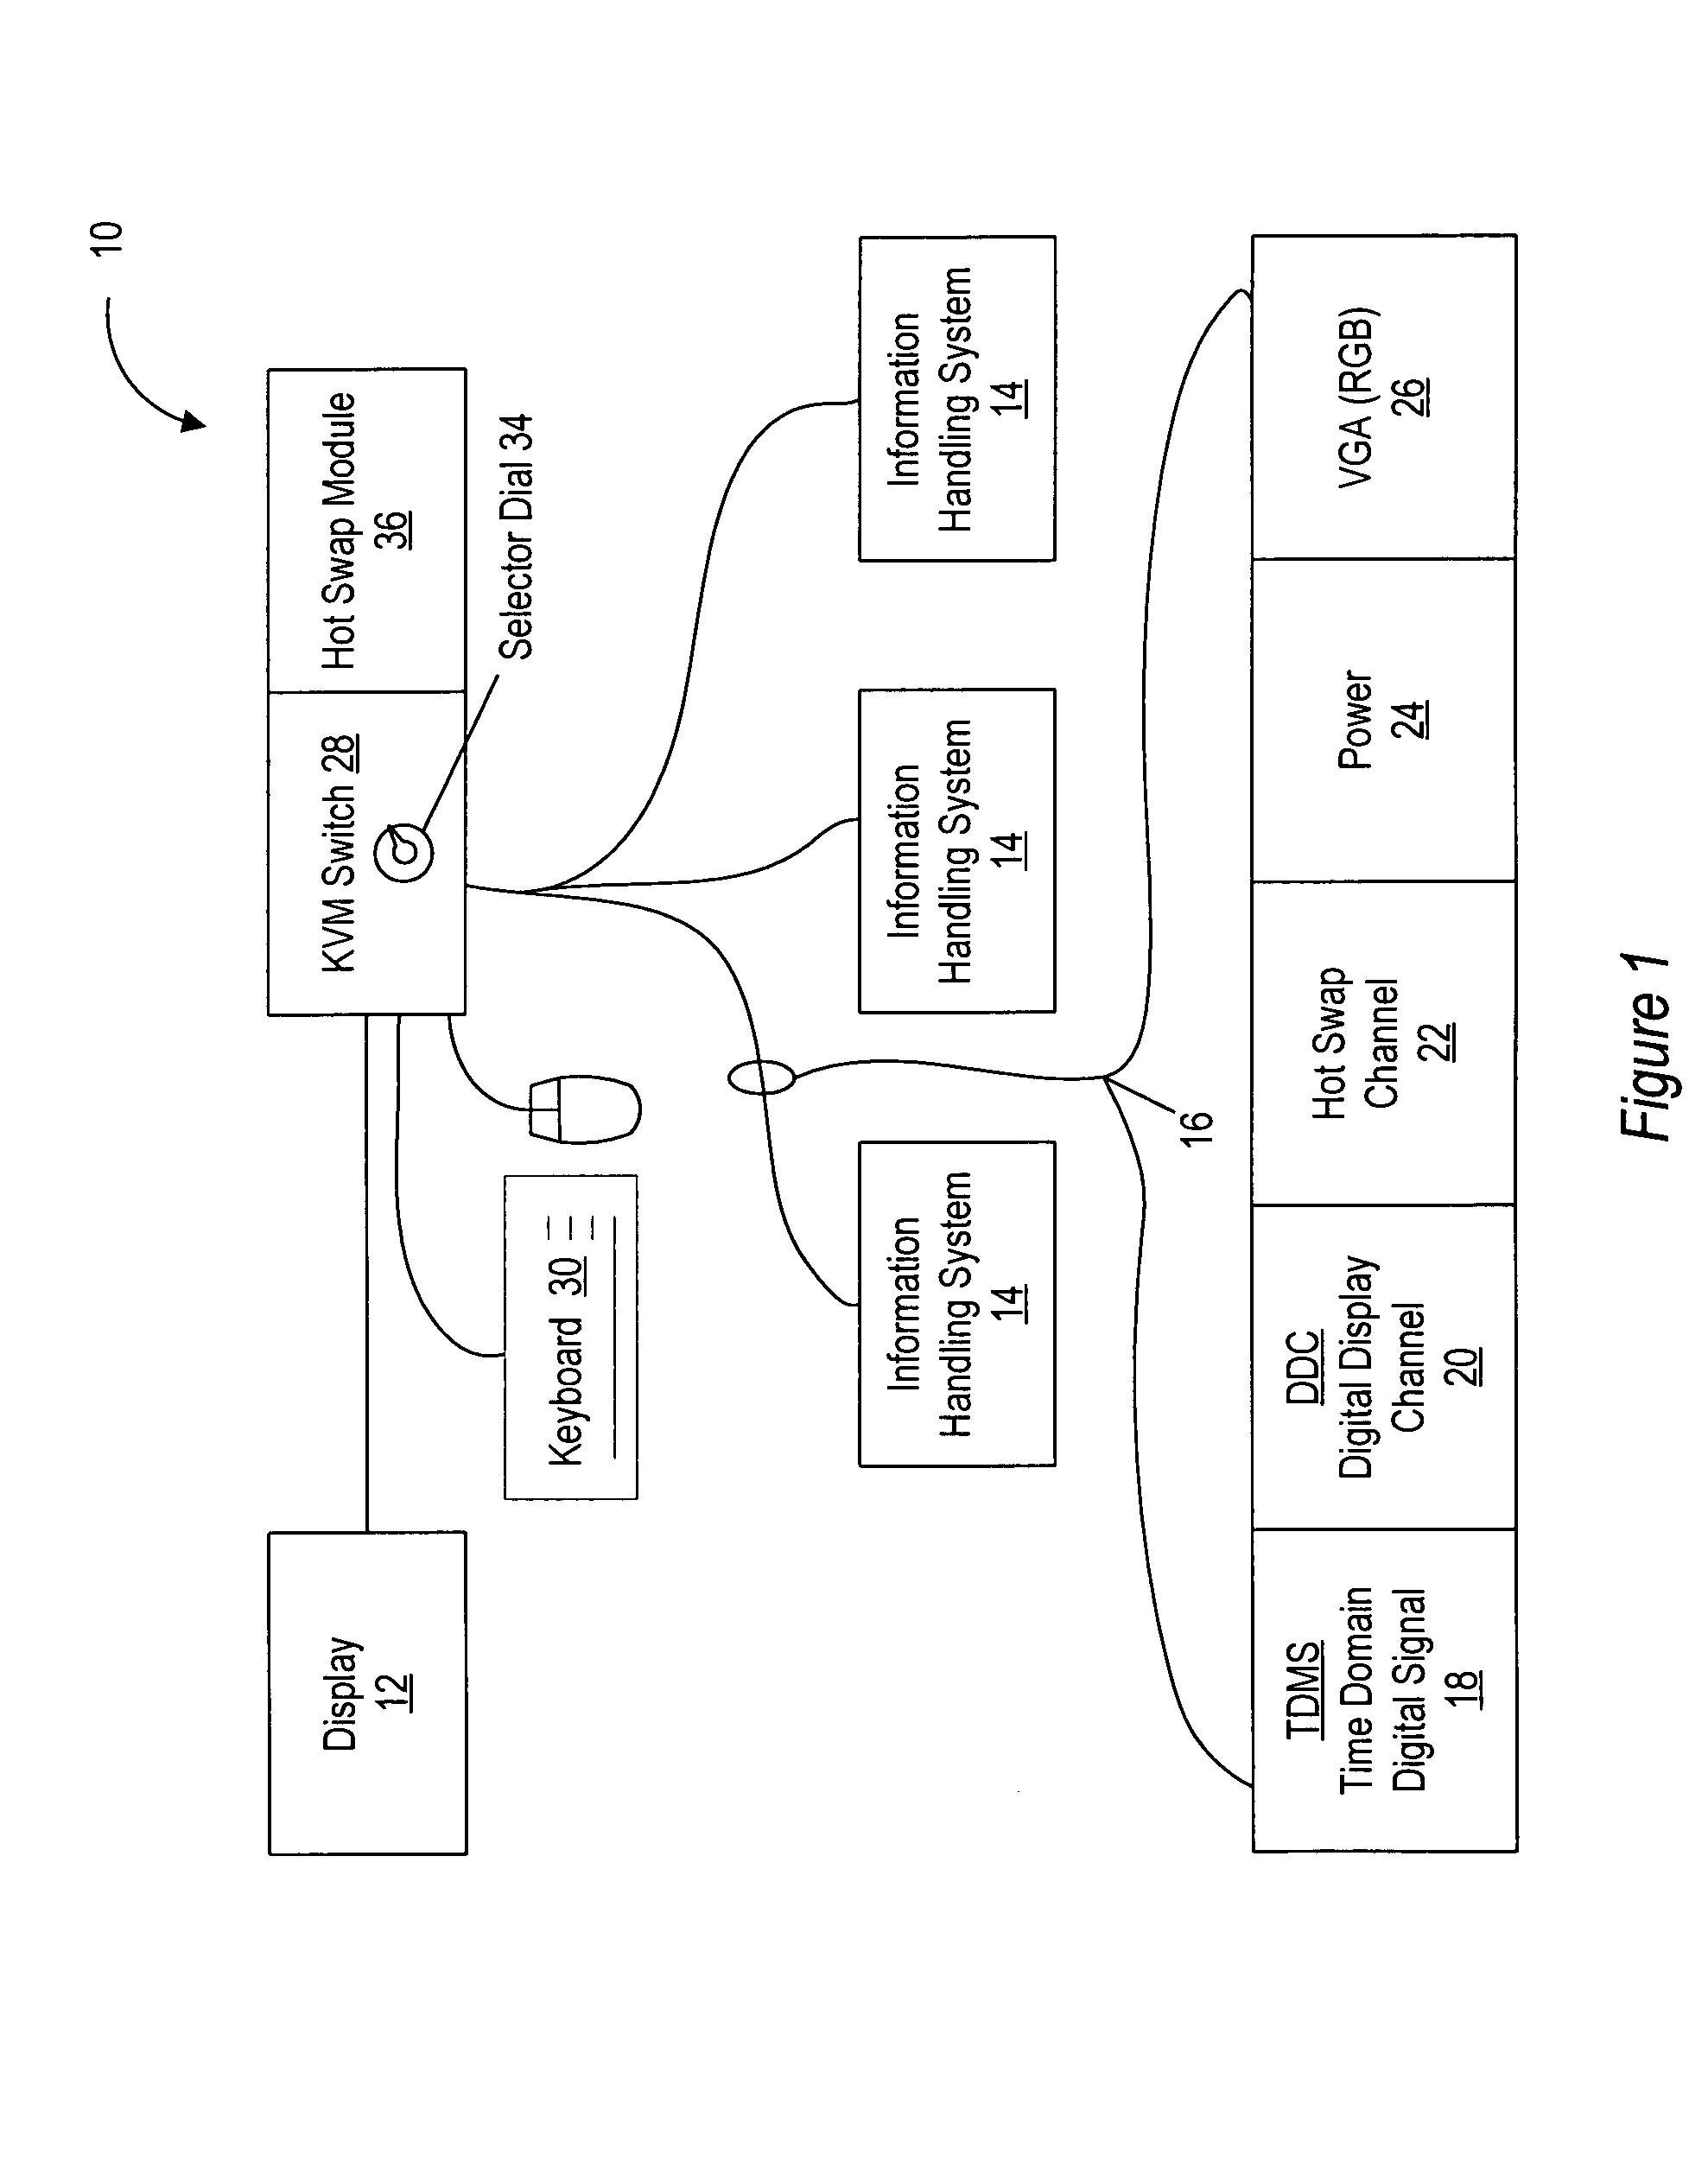 Method and system for switching a DVI display host